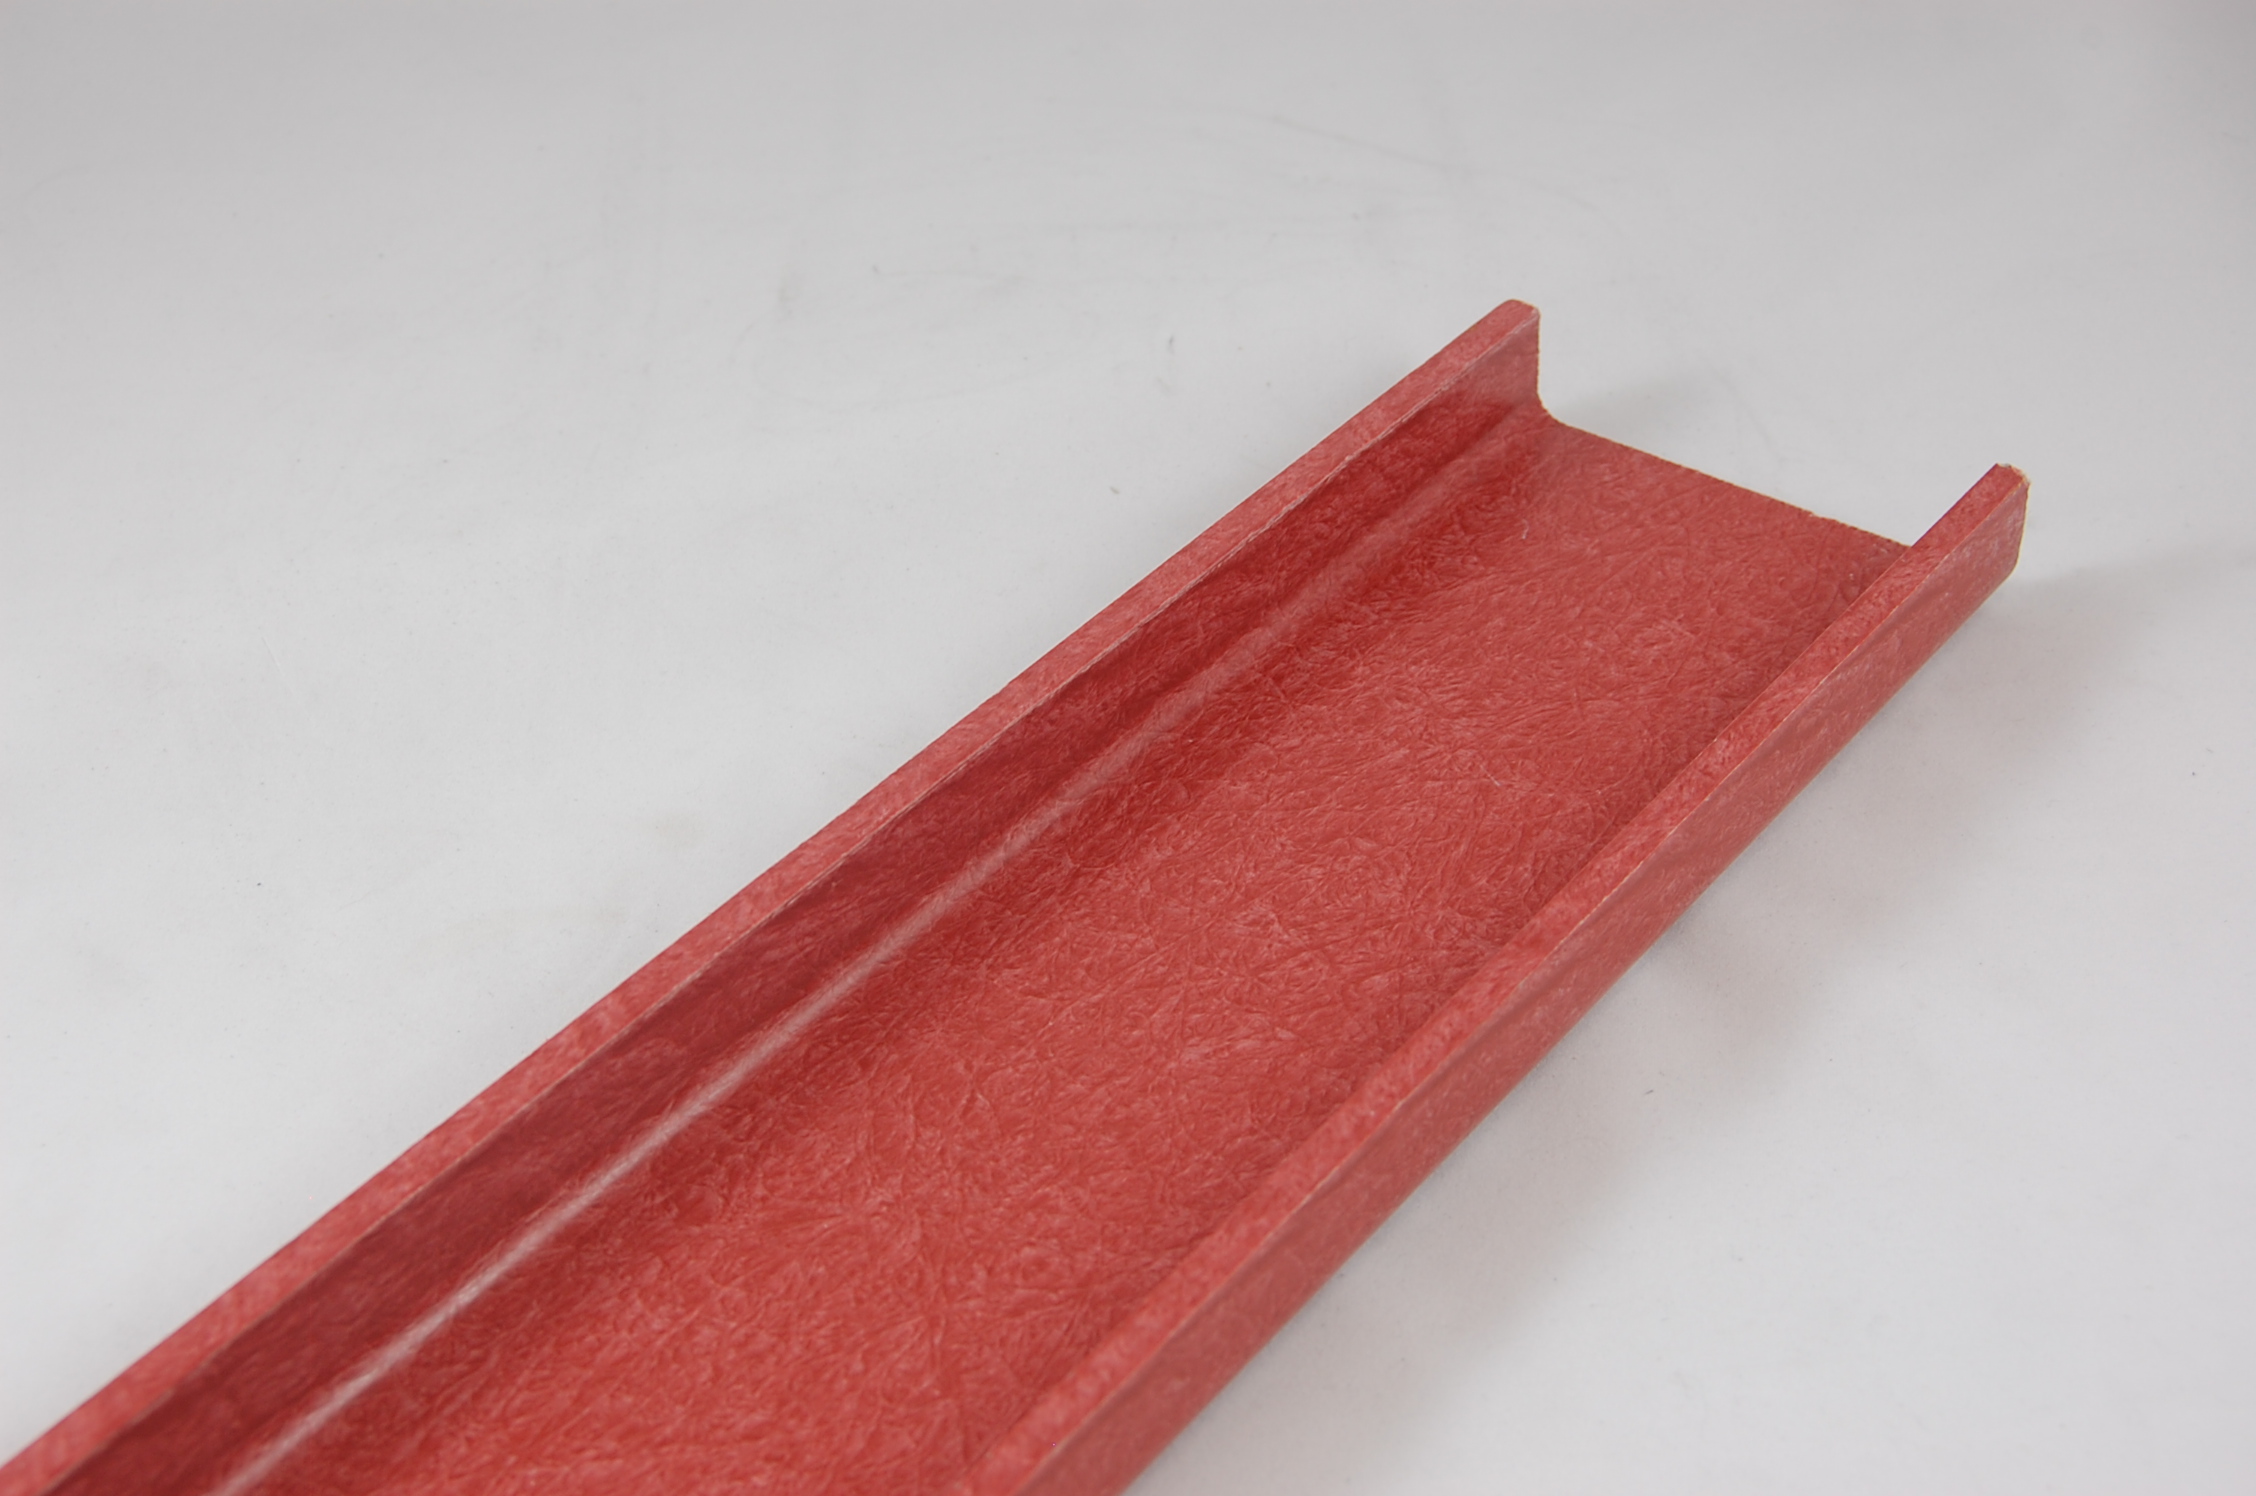 2"W x 13/16" Leg x 1/8" thick GLASROD® Grade 1130 Fiberglass-Reinforced Polyester Laminate Channel, red,  120"L channel